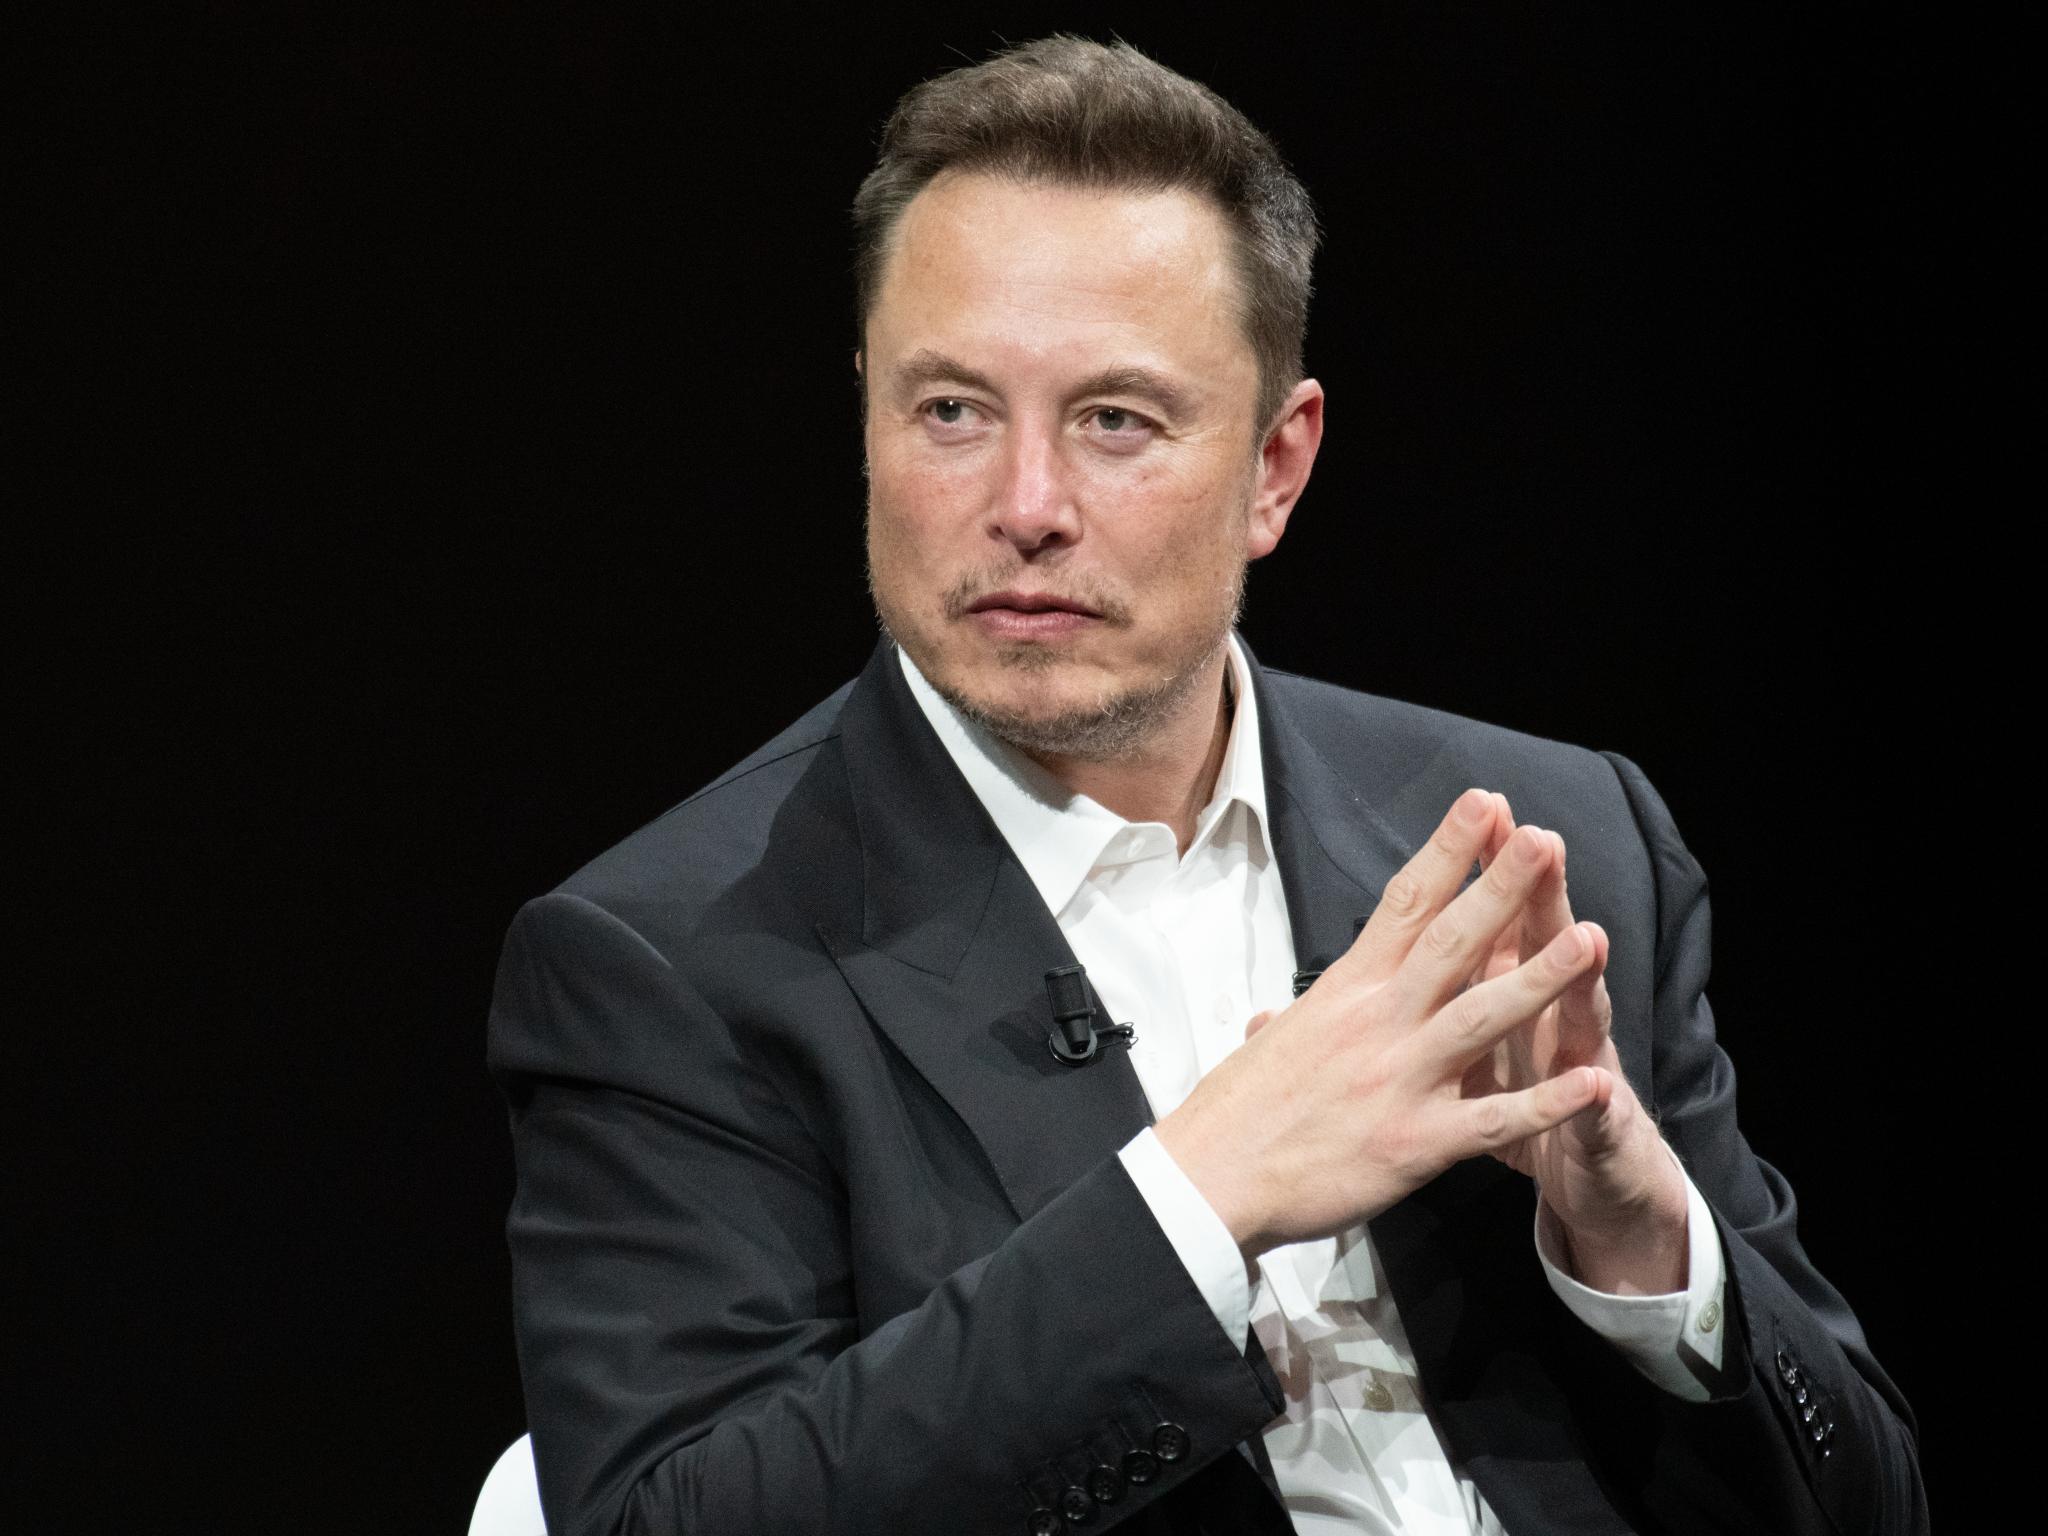  teslas-board-chair-pleads-for-reapproval-of-elon-musks-controversial-47-billion-compensation-incredibly-important-for-the-future-of-the-company 